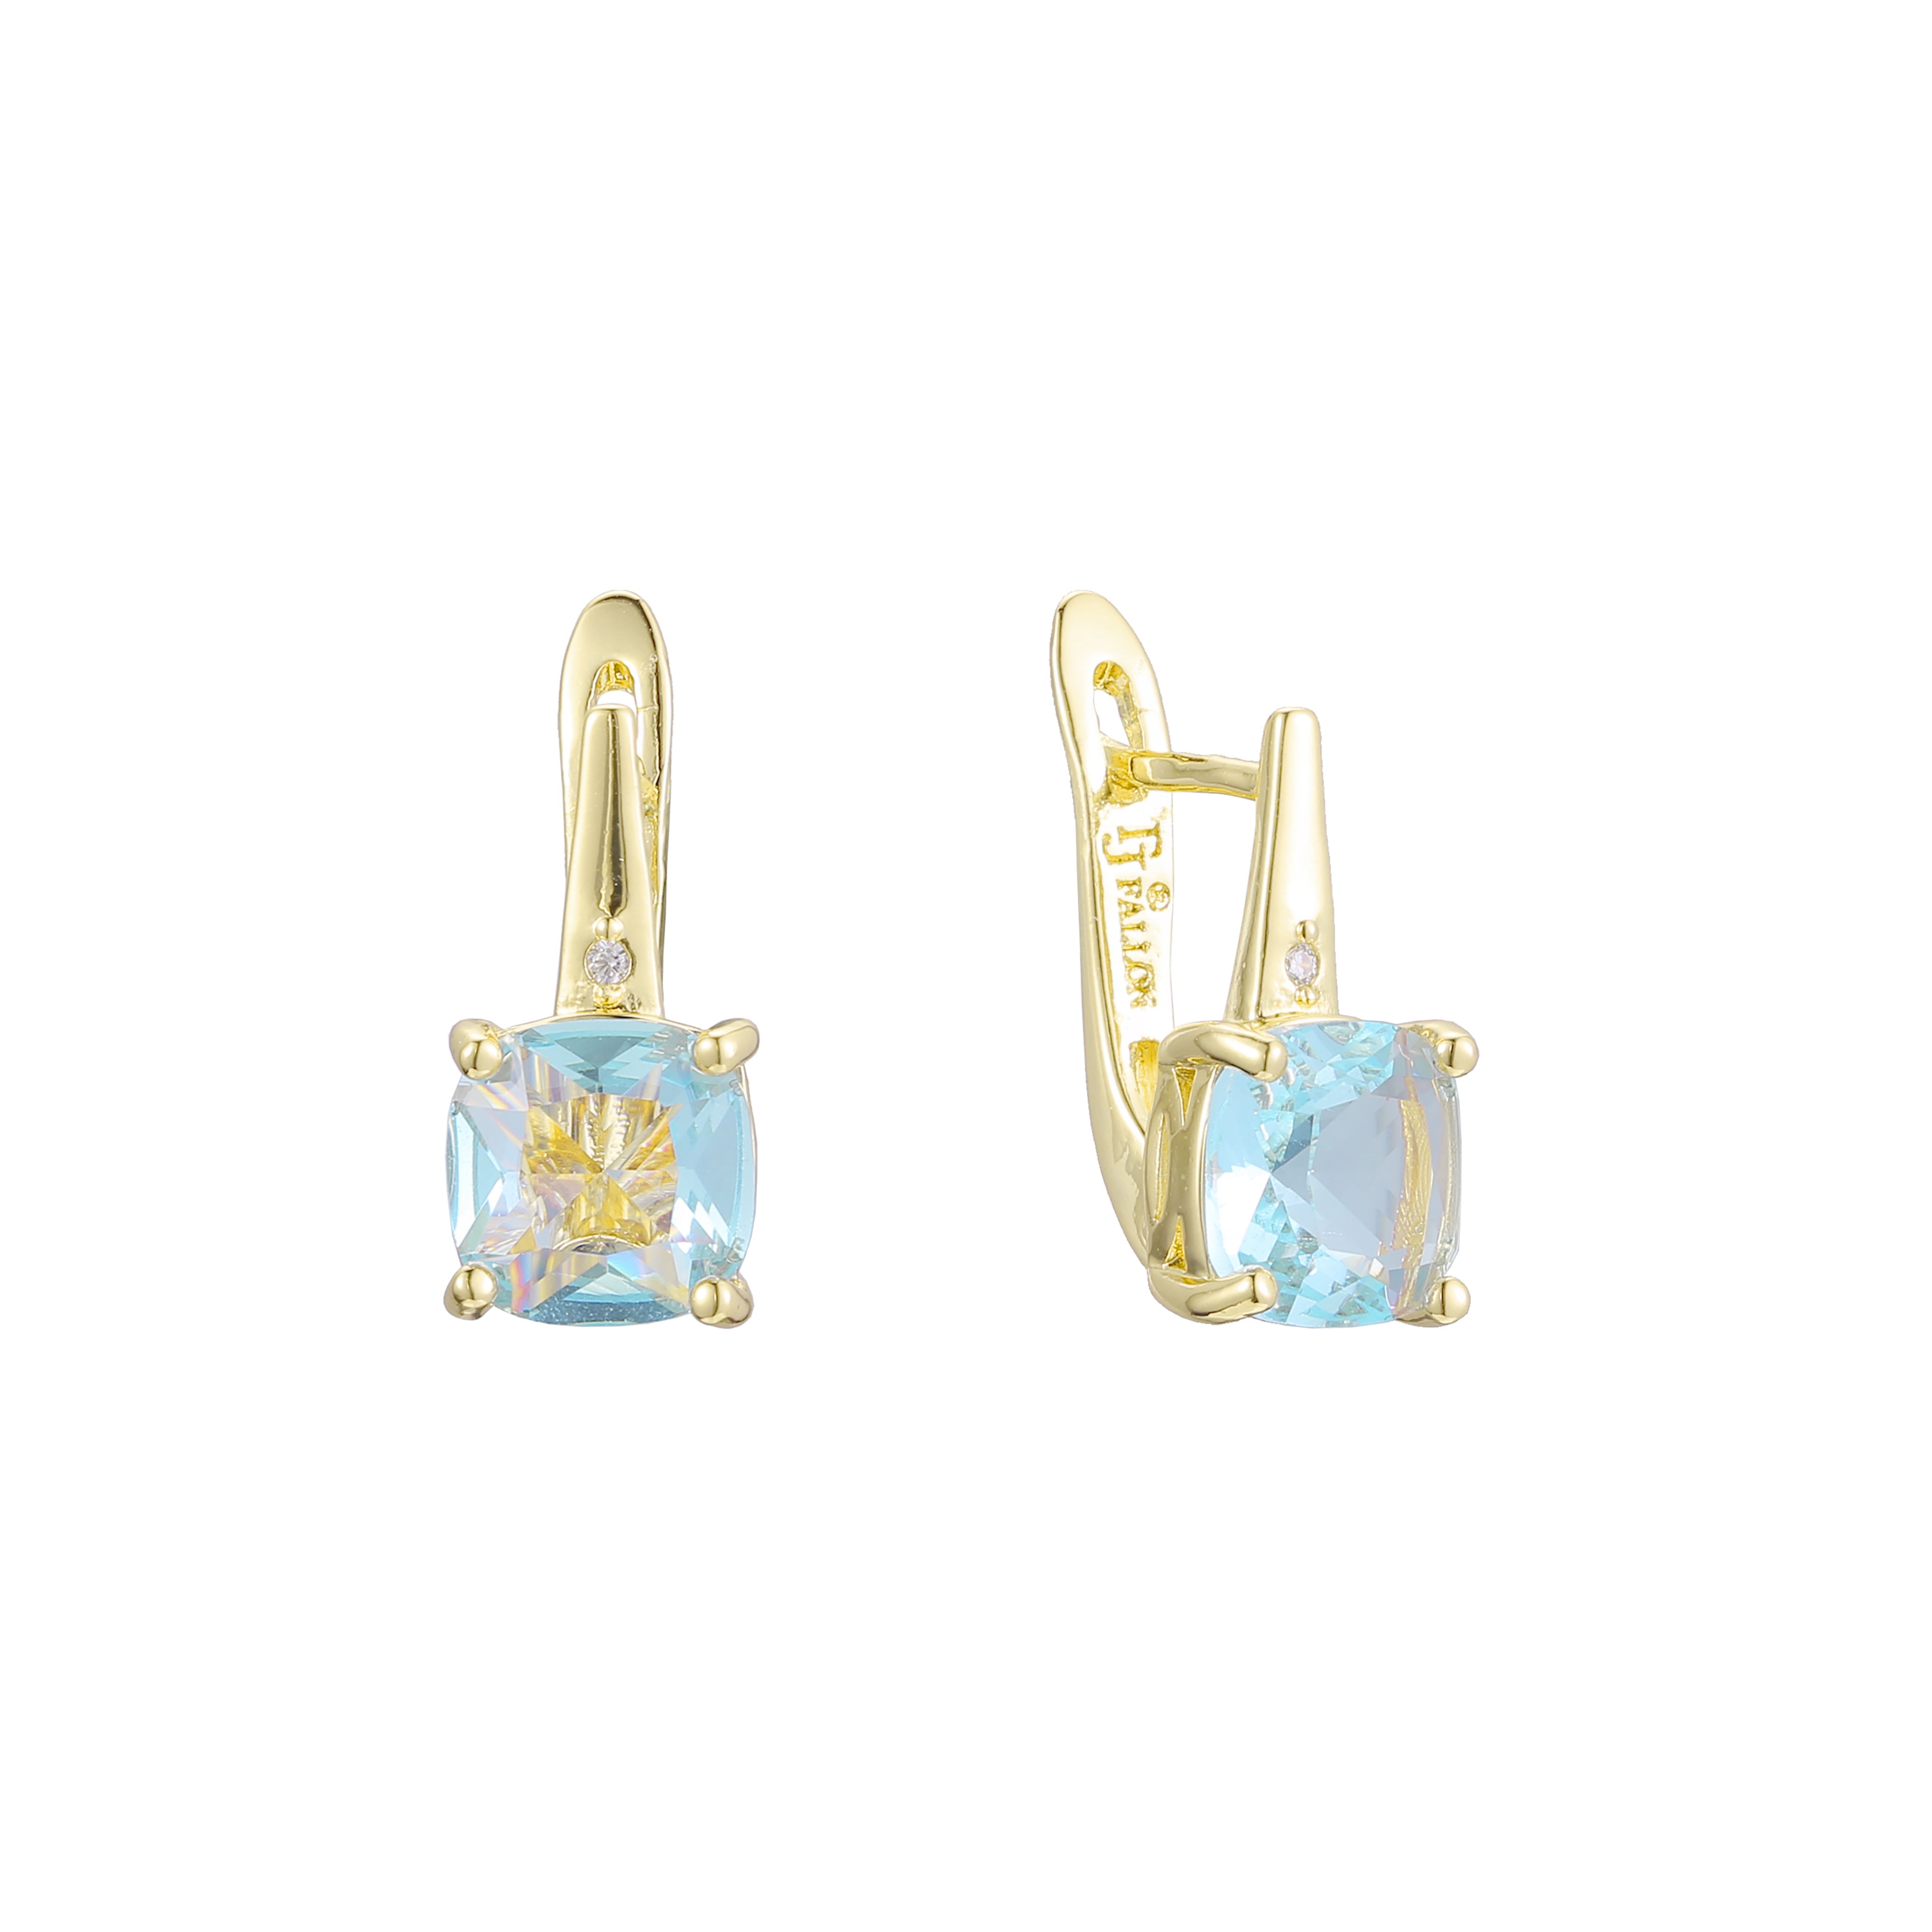 Solitaire earrings in 14K Gold, Rose Gold plating colors